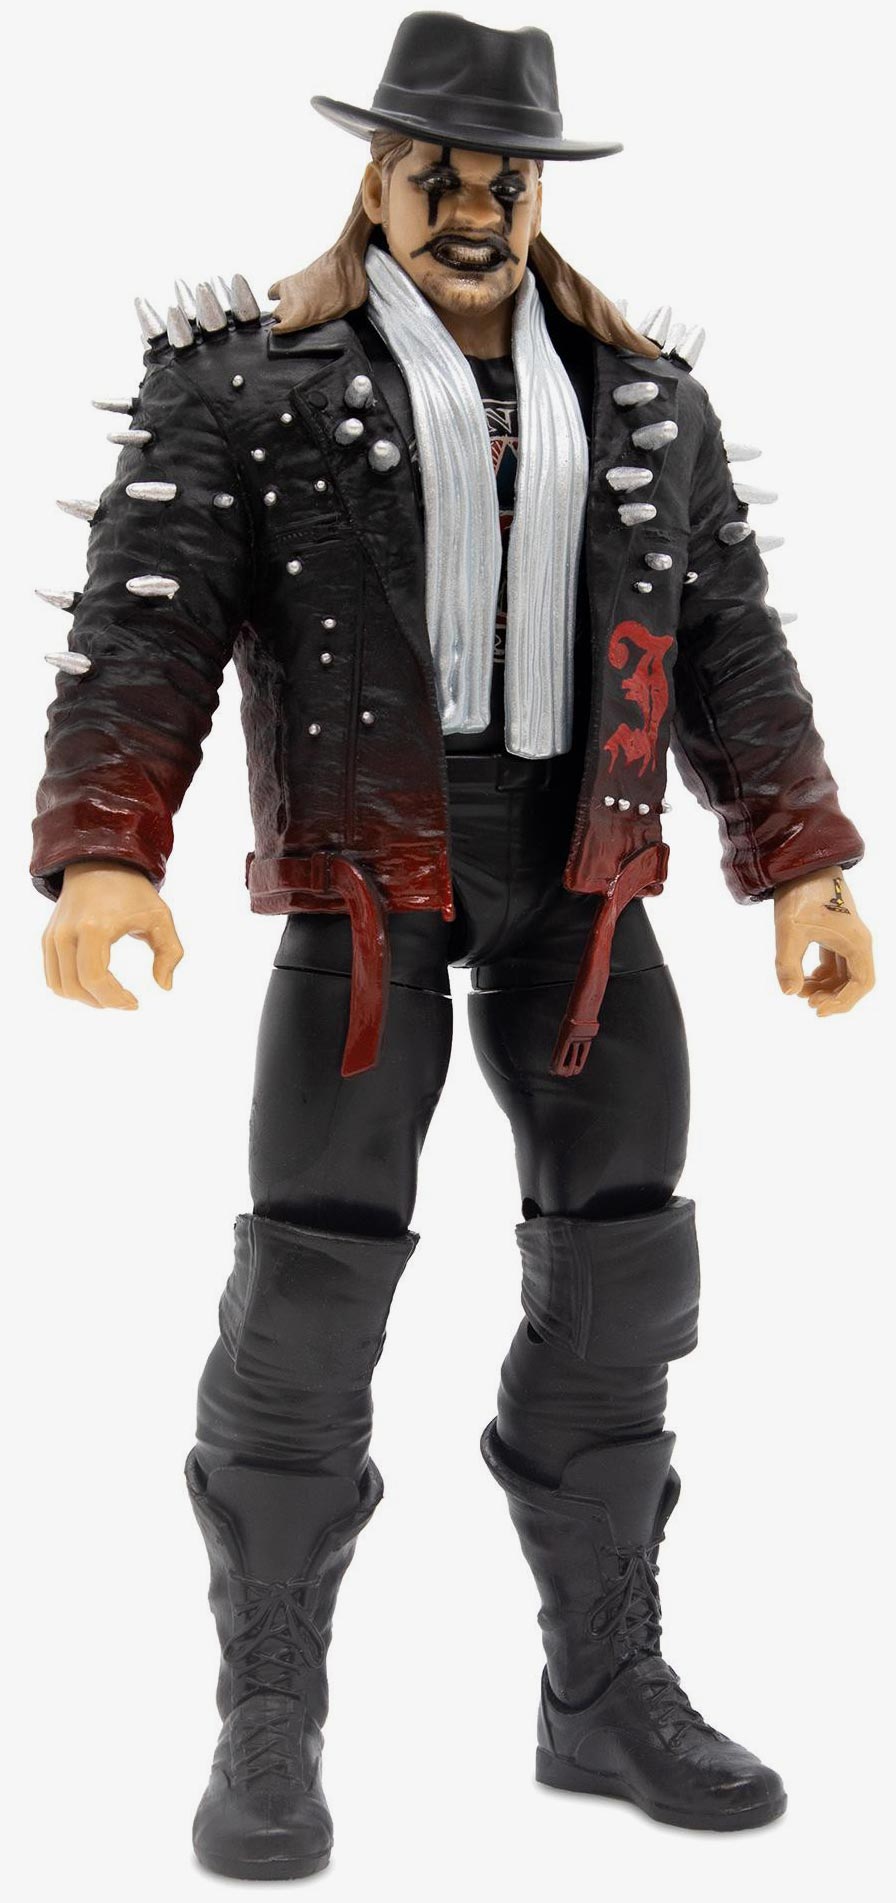 Chris Jericho - AEW Unrivaled Collection Series #8